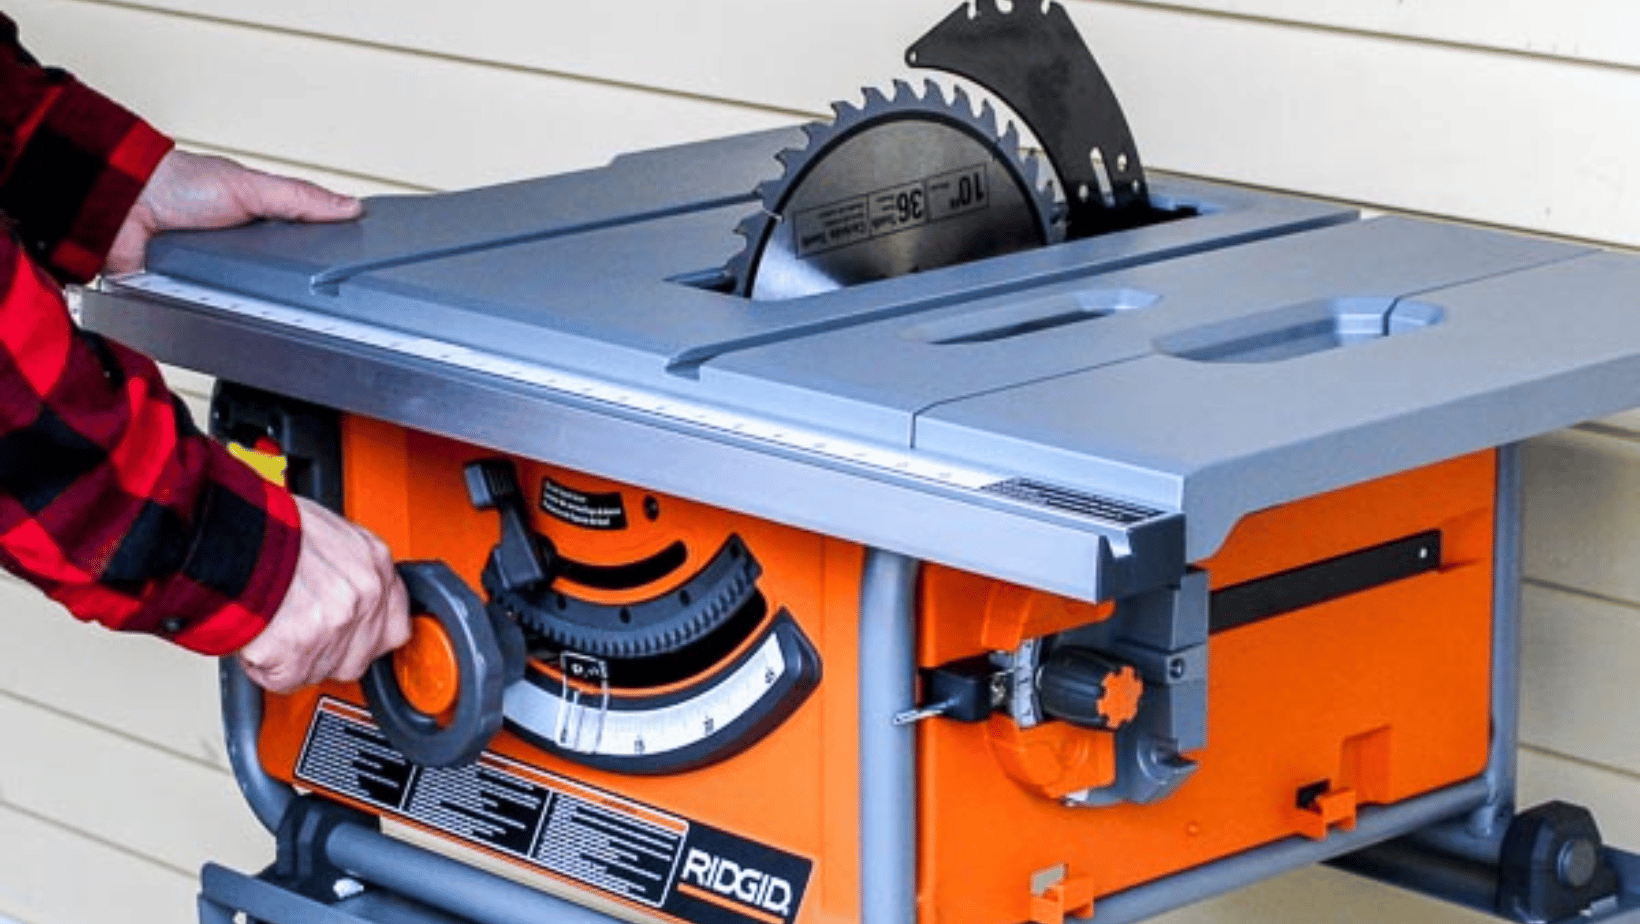 How To Set Up a Portable Table Saw?